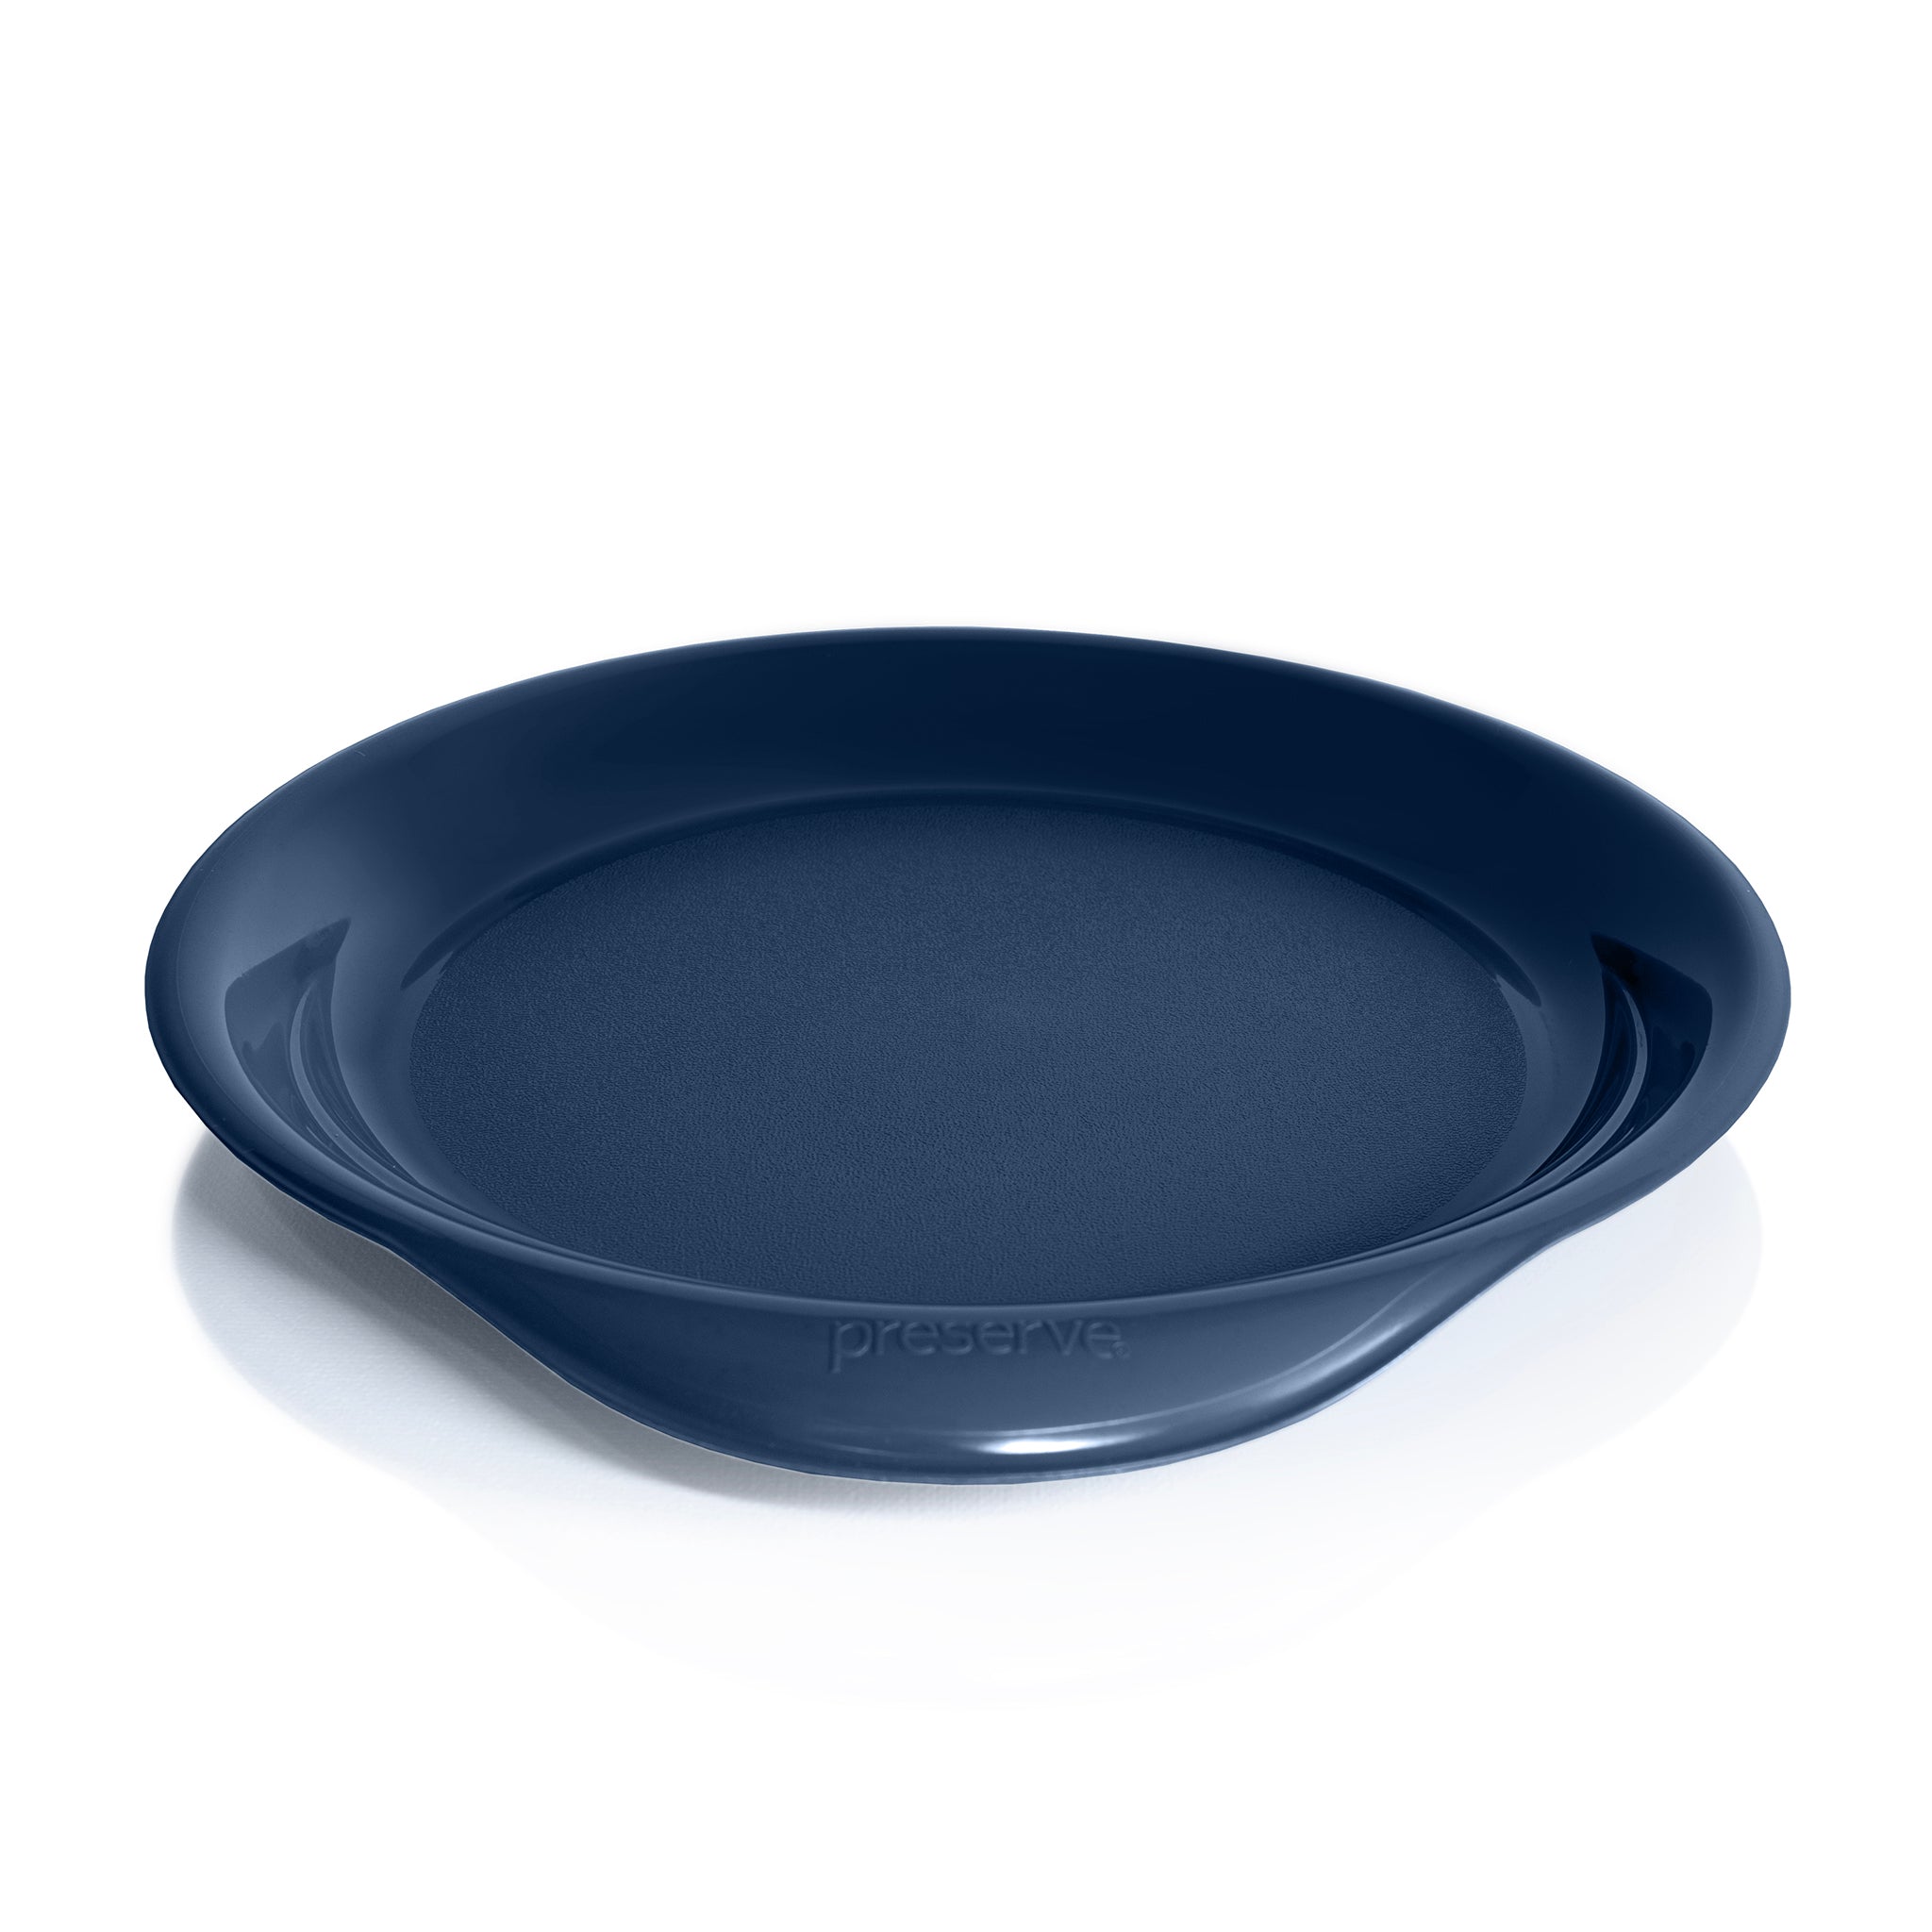 Midnight blue recycled plastic plate